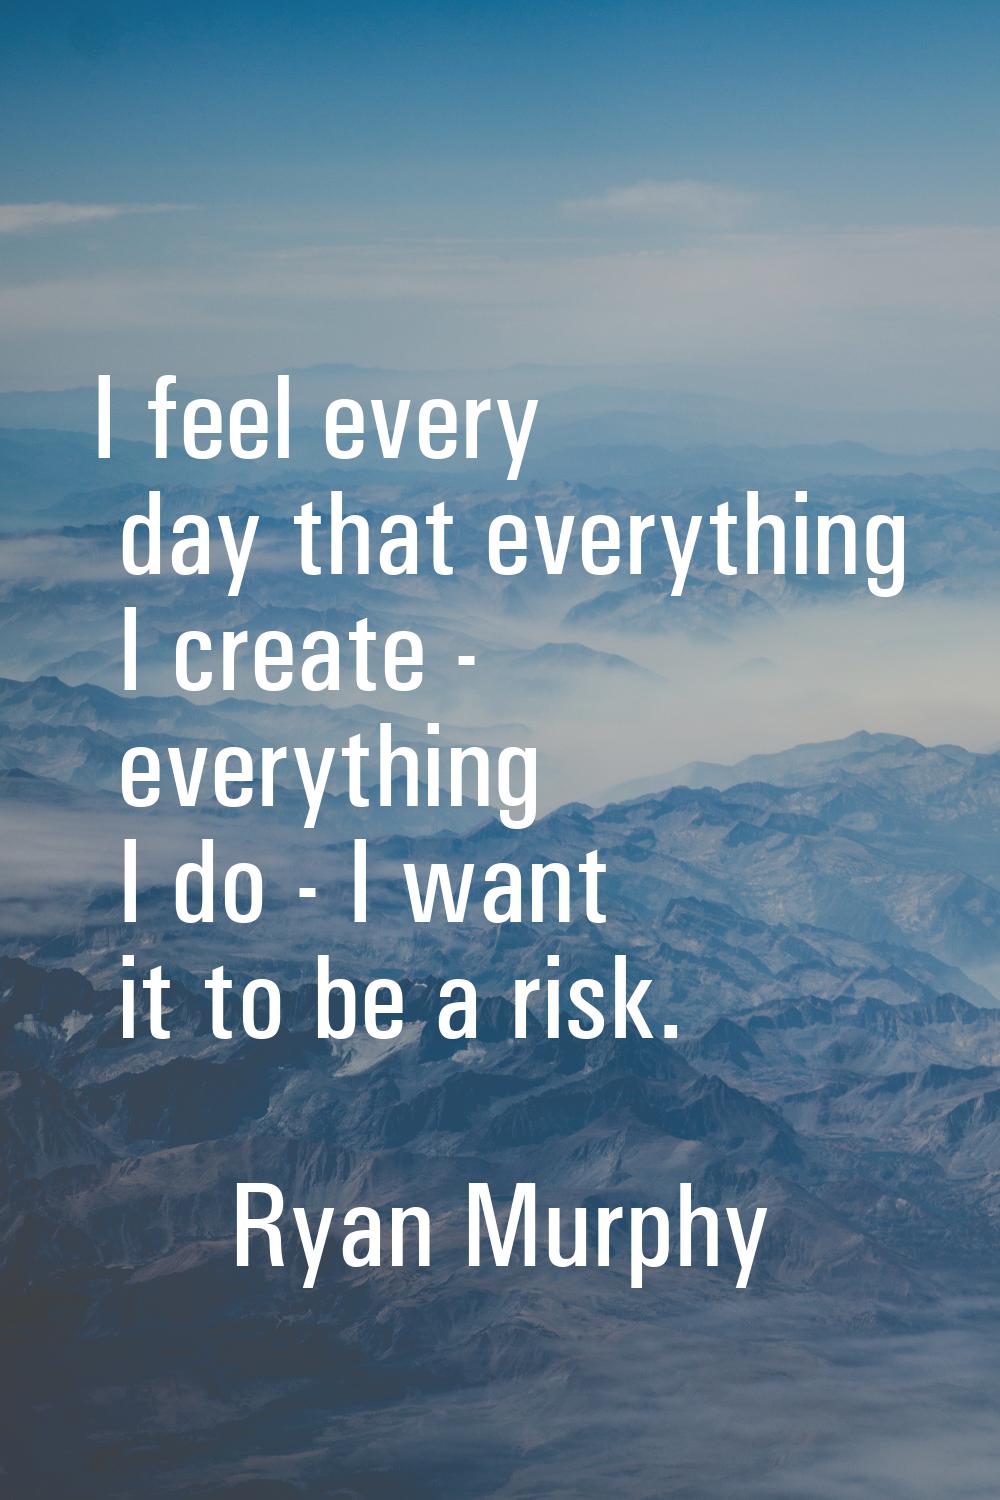 I feel every day that everything I create - everything I do - I want it to be a risk.